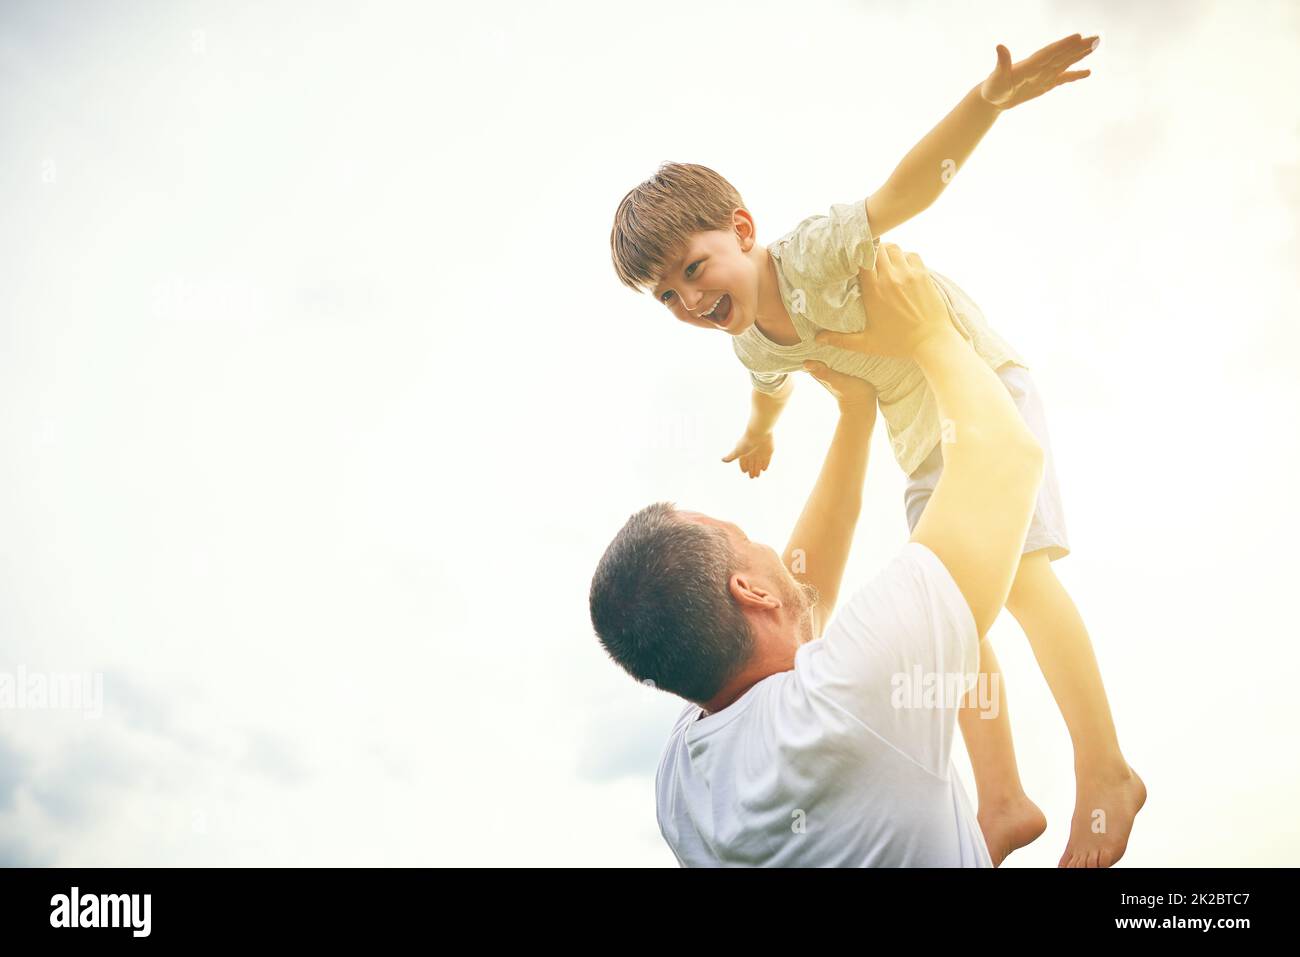 You getting bigger everyday but youre still my little boy. Cropped shot of a father tossing his adorable son into the air outside. Stock Photo